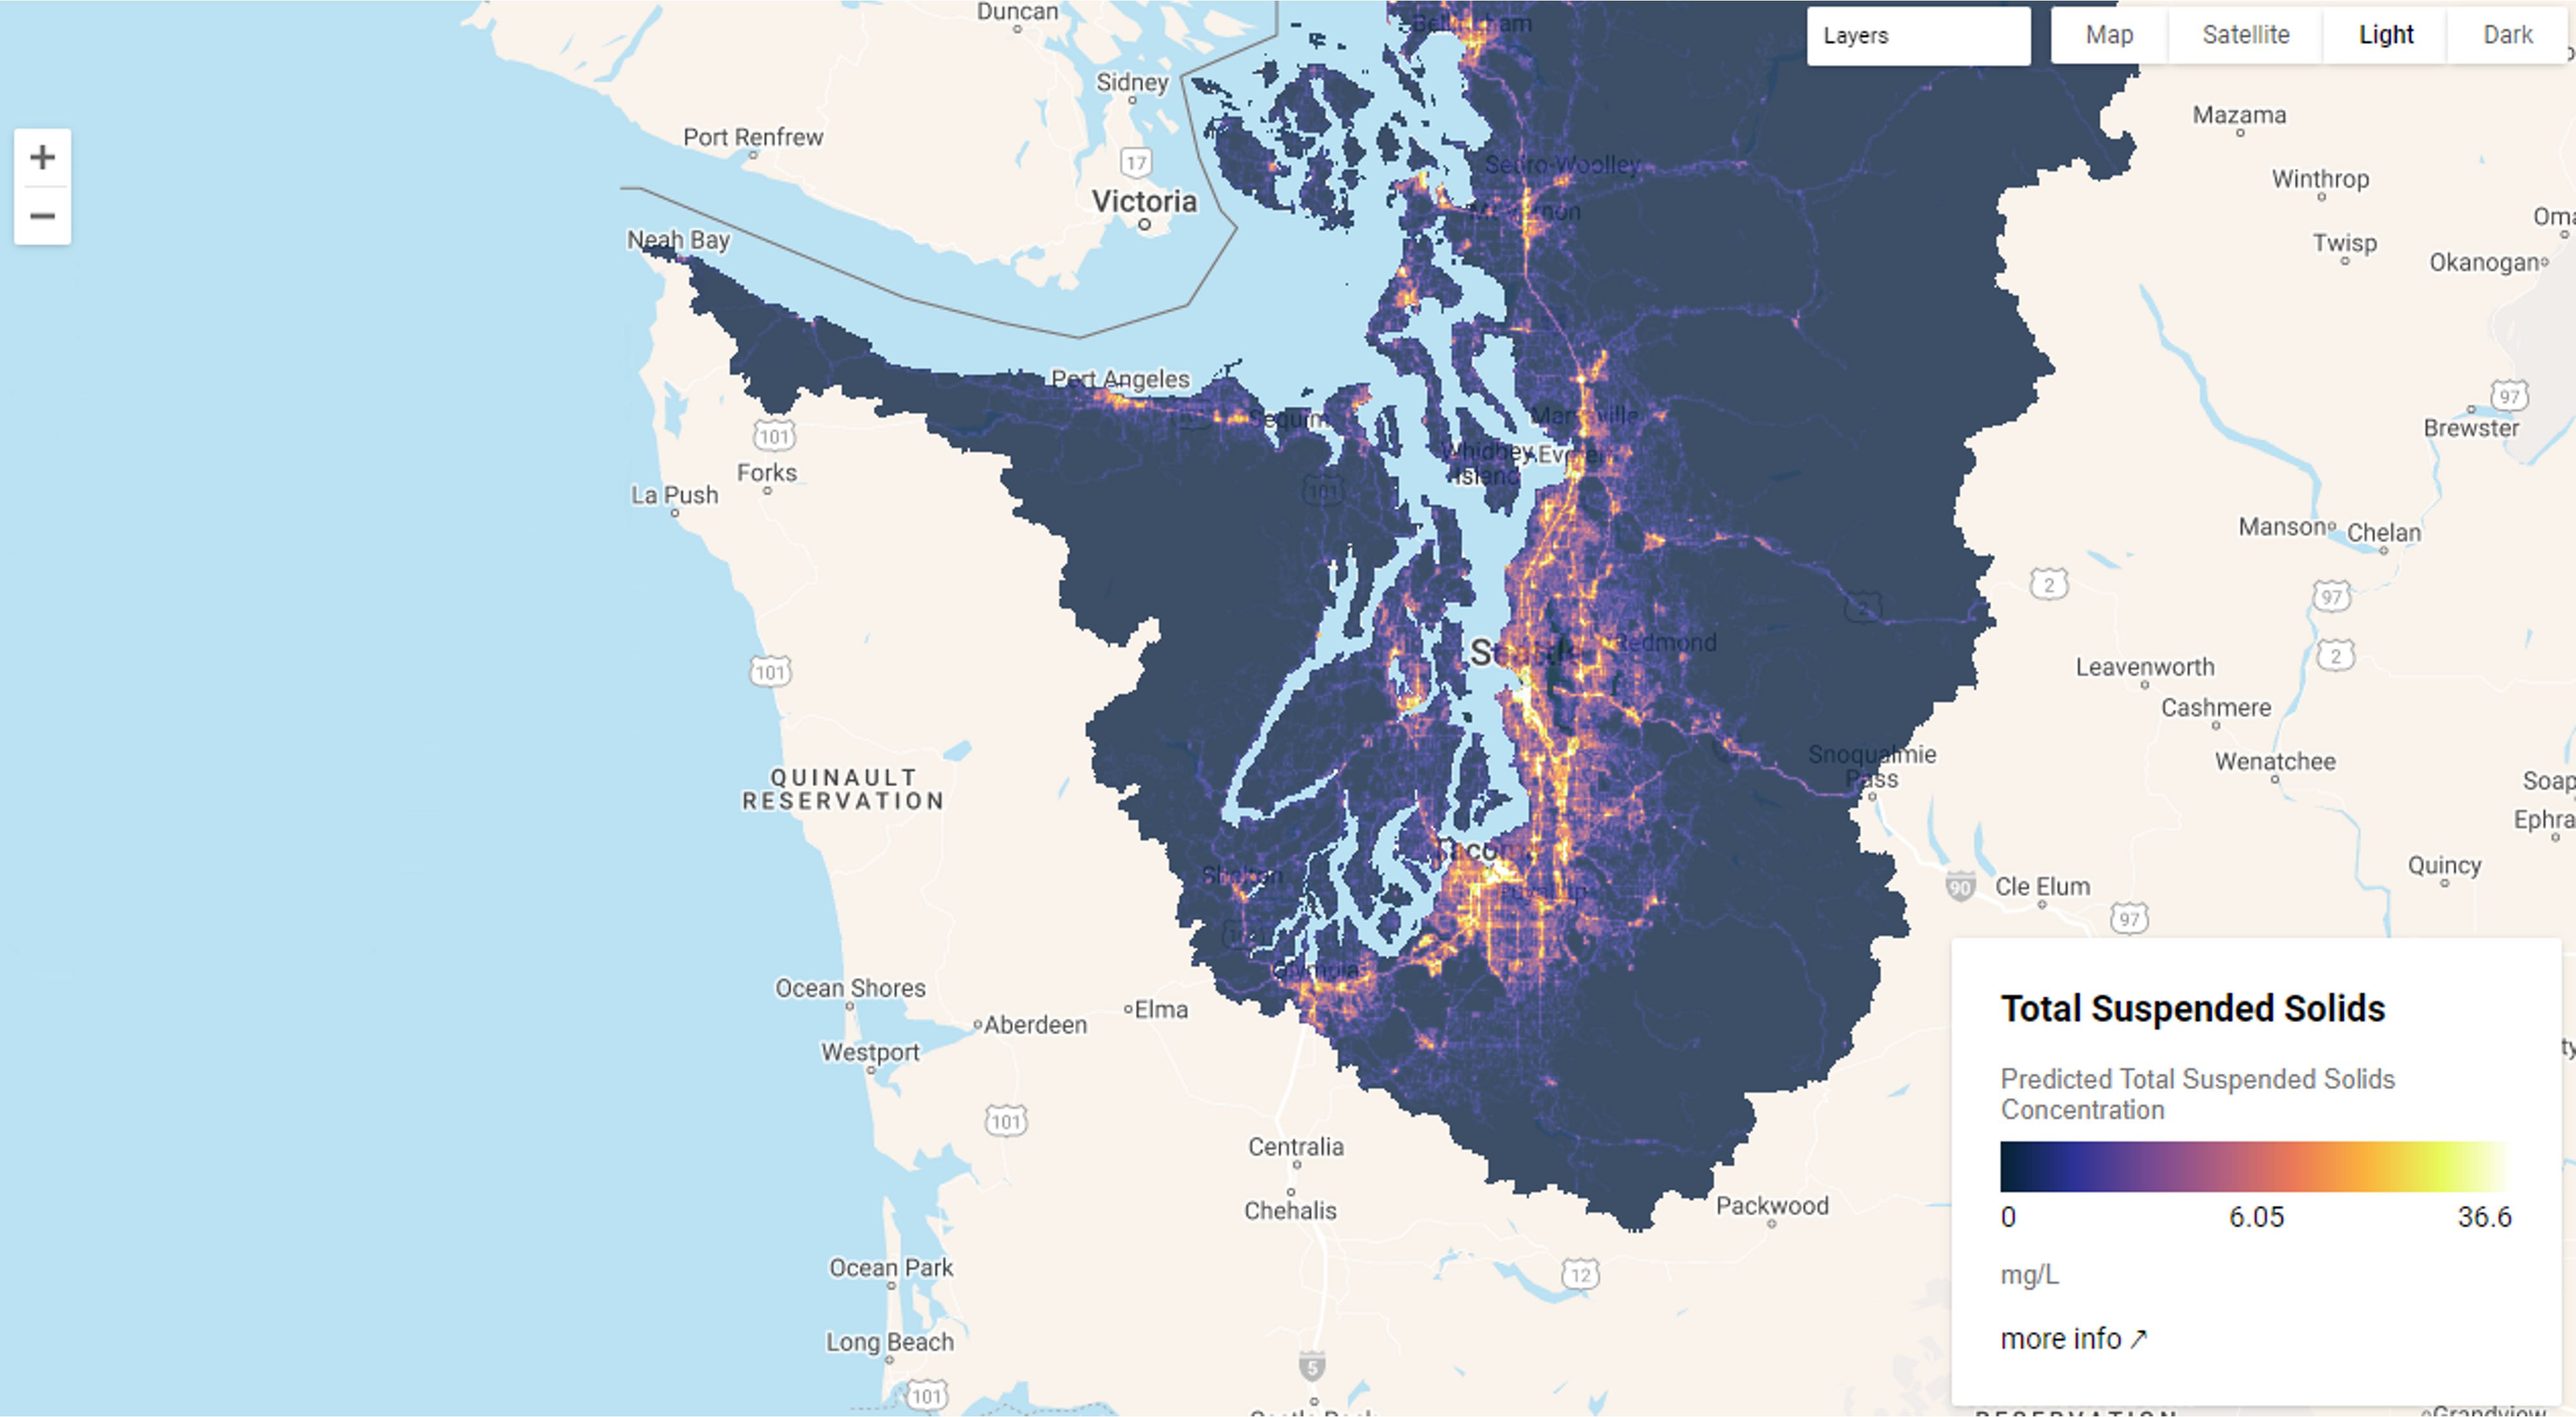 Illustration of the Puget Sound, Washington watershed with areas highlighted in dark colors.